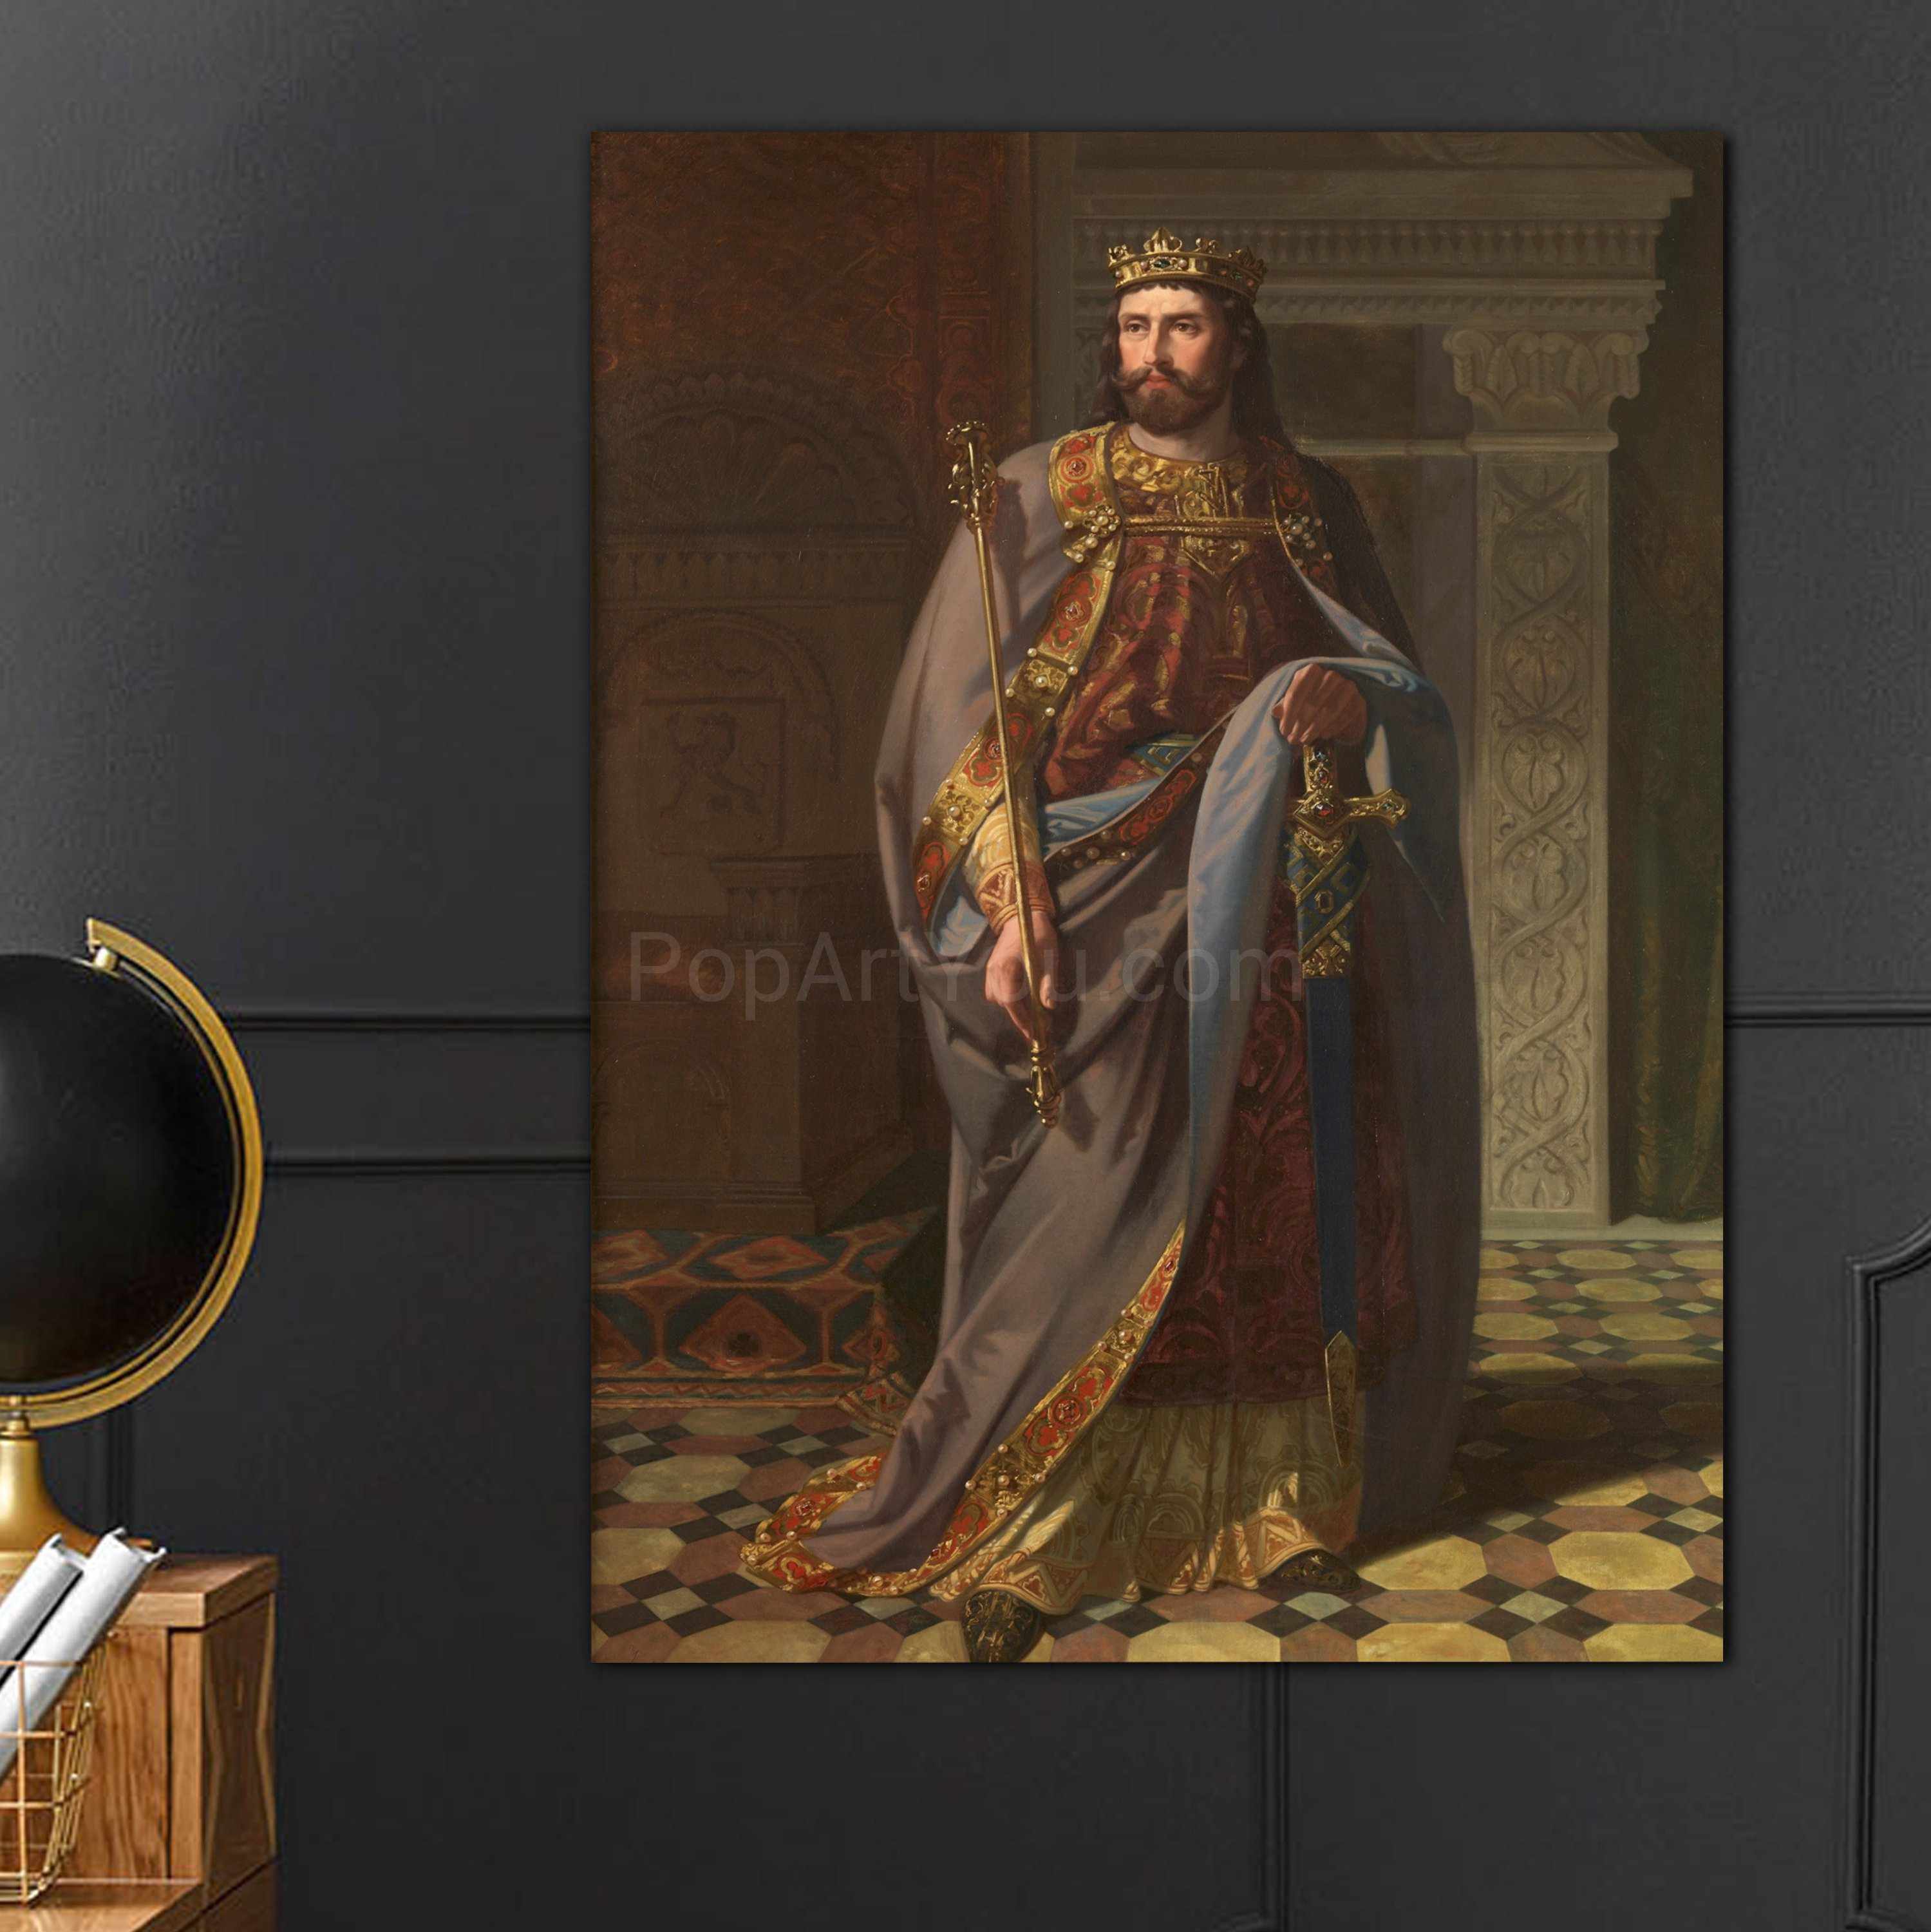 A portrait of a man dressed in historical royal clothes with a crown hangs on the gray wall next to the globe